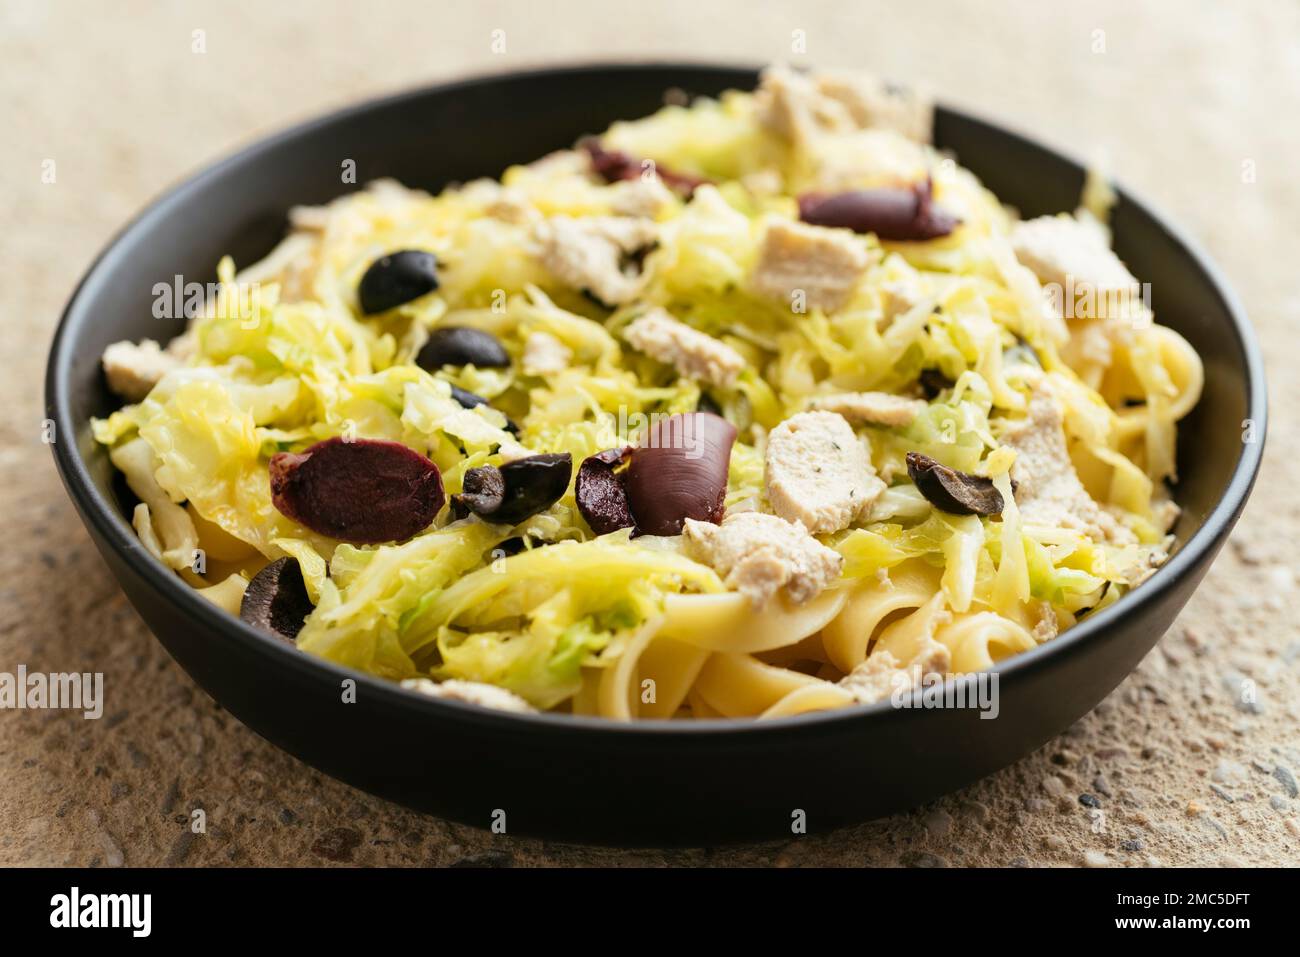 Savoy Cabbage on Tagliatelle with black olives and vegan feta. Stock Photo